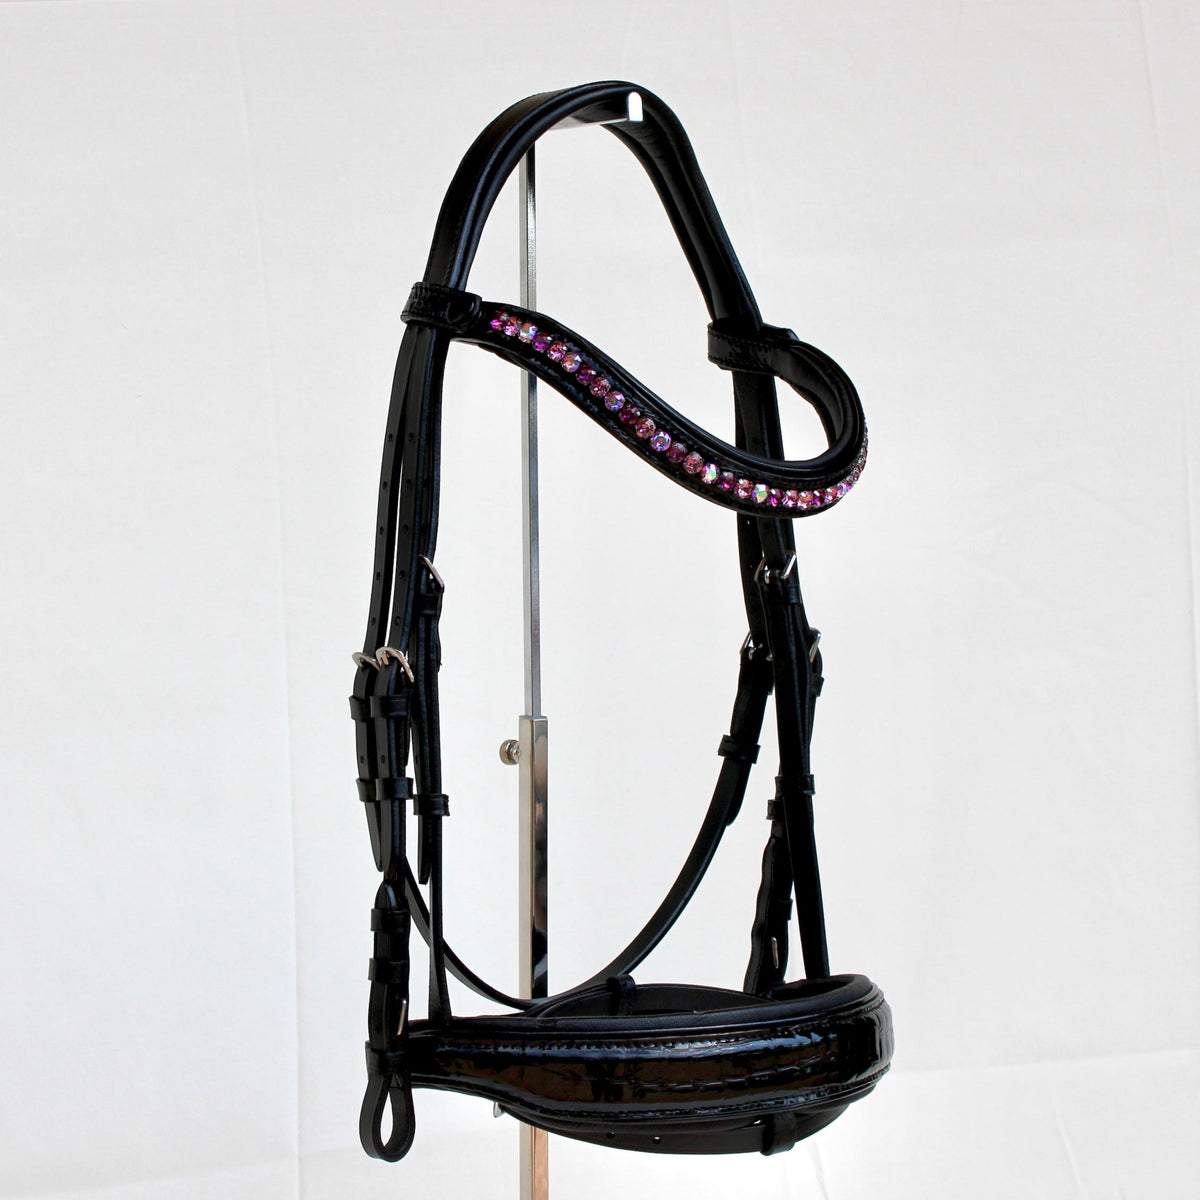 The Mulberry Black Patent Leather Snaffle Bridle